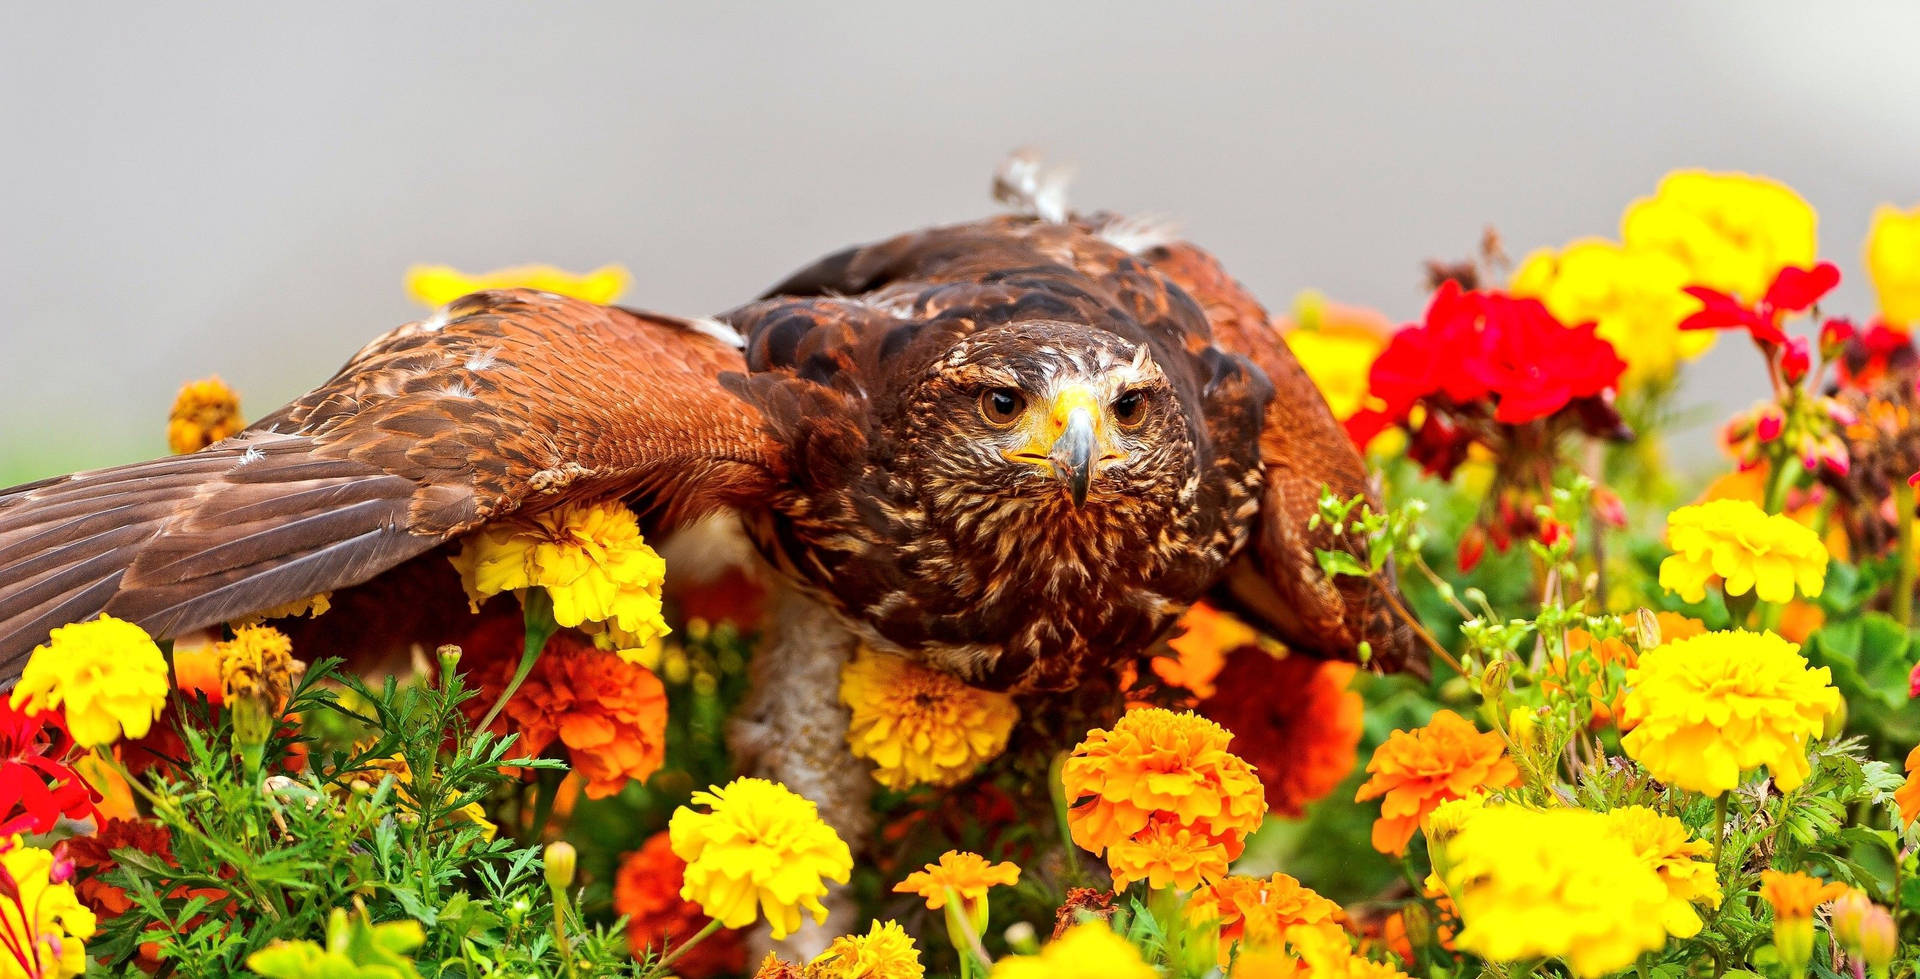 Marigold Flowers With Eagle